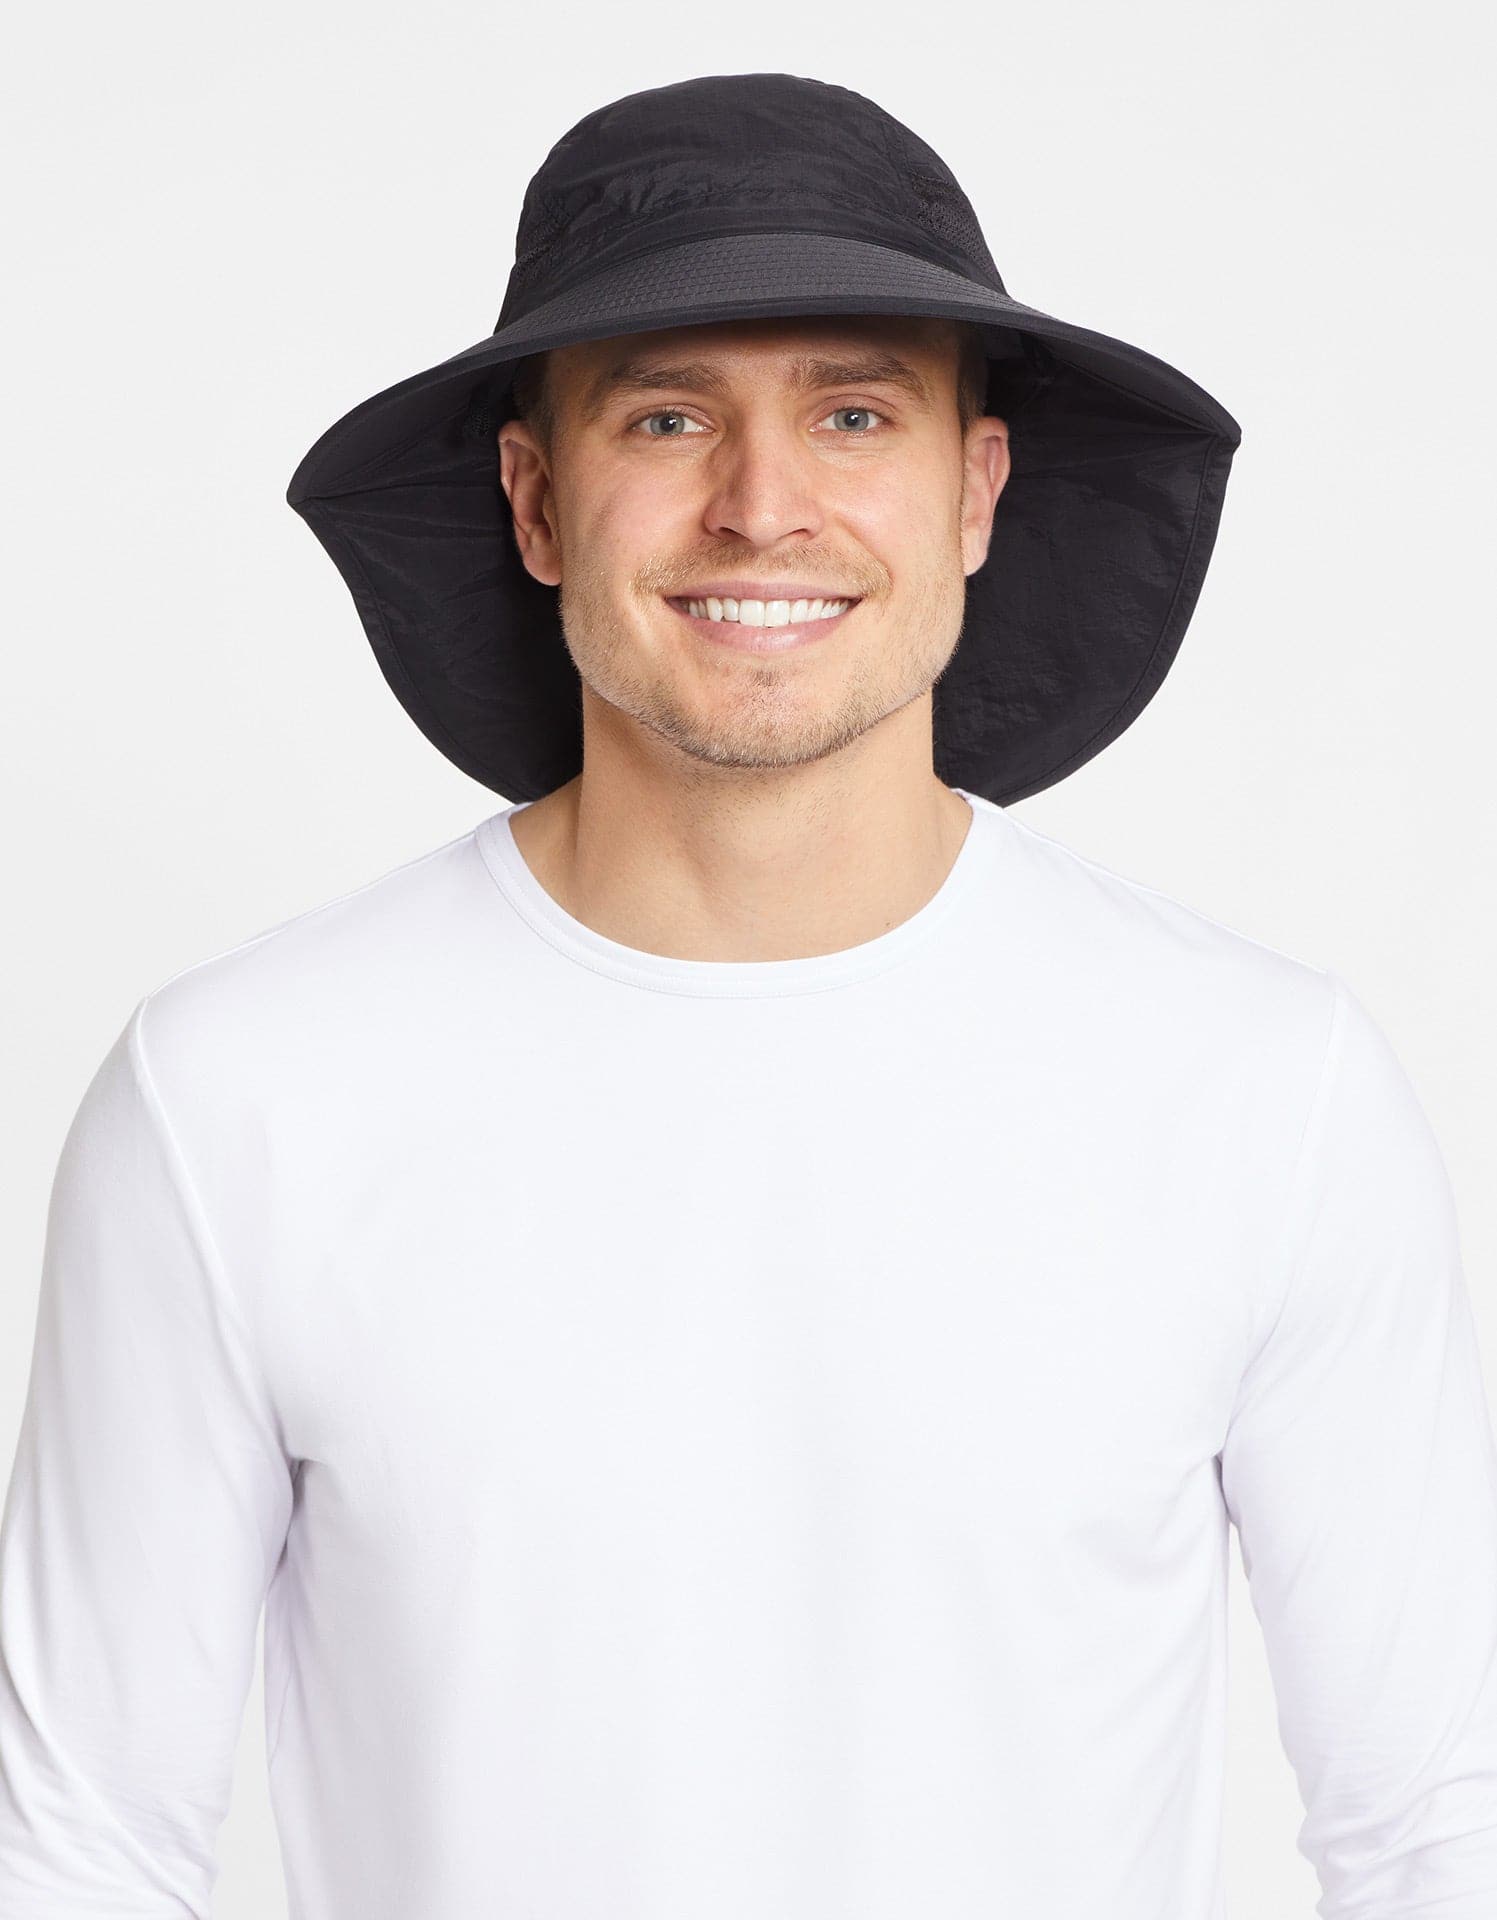 Solbari Upf 50+ Protective Adventure Sun Hat – Universal Fit, UV Protection For Men & Women, Great For The Beach, Fishing, Gardening & More